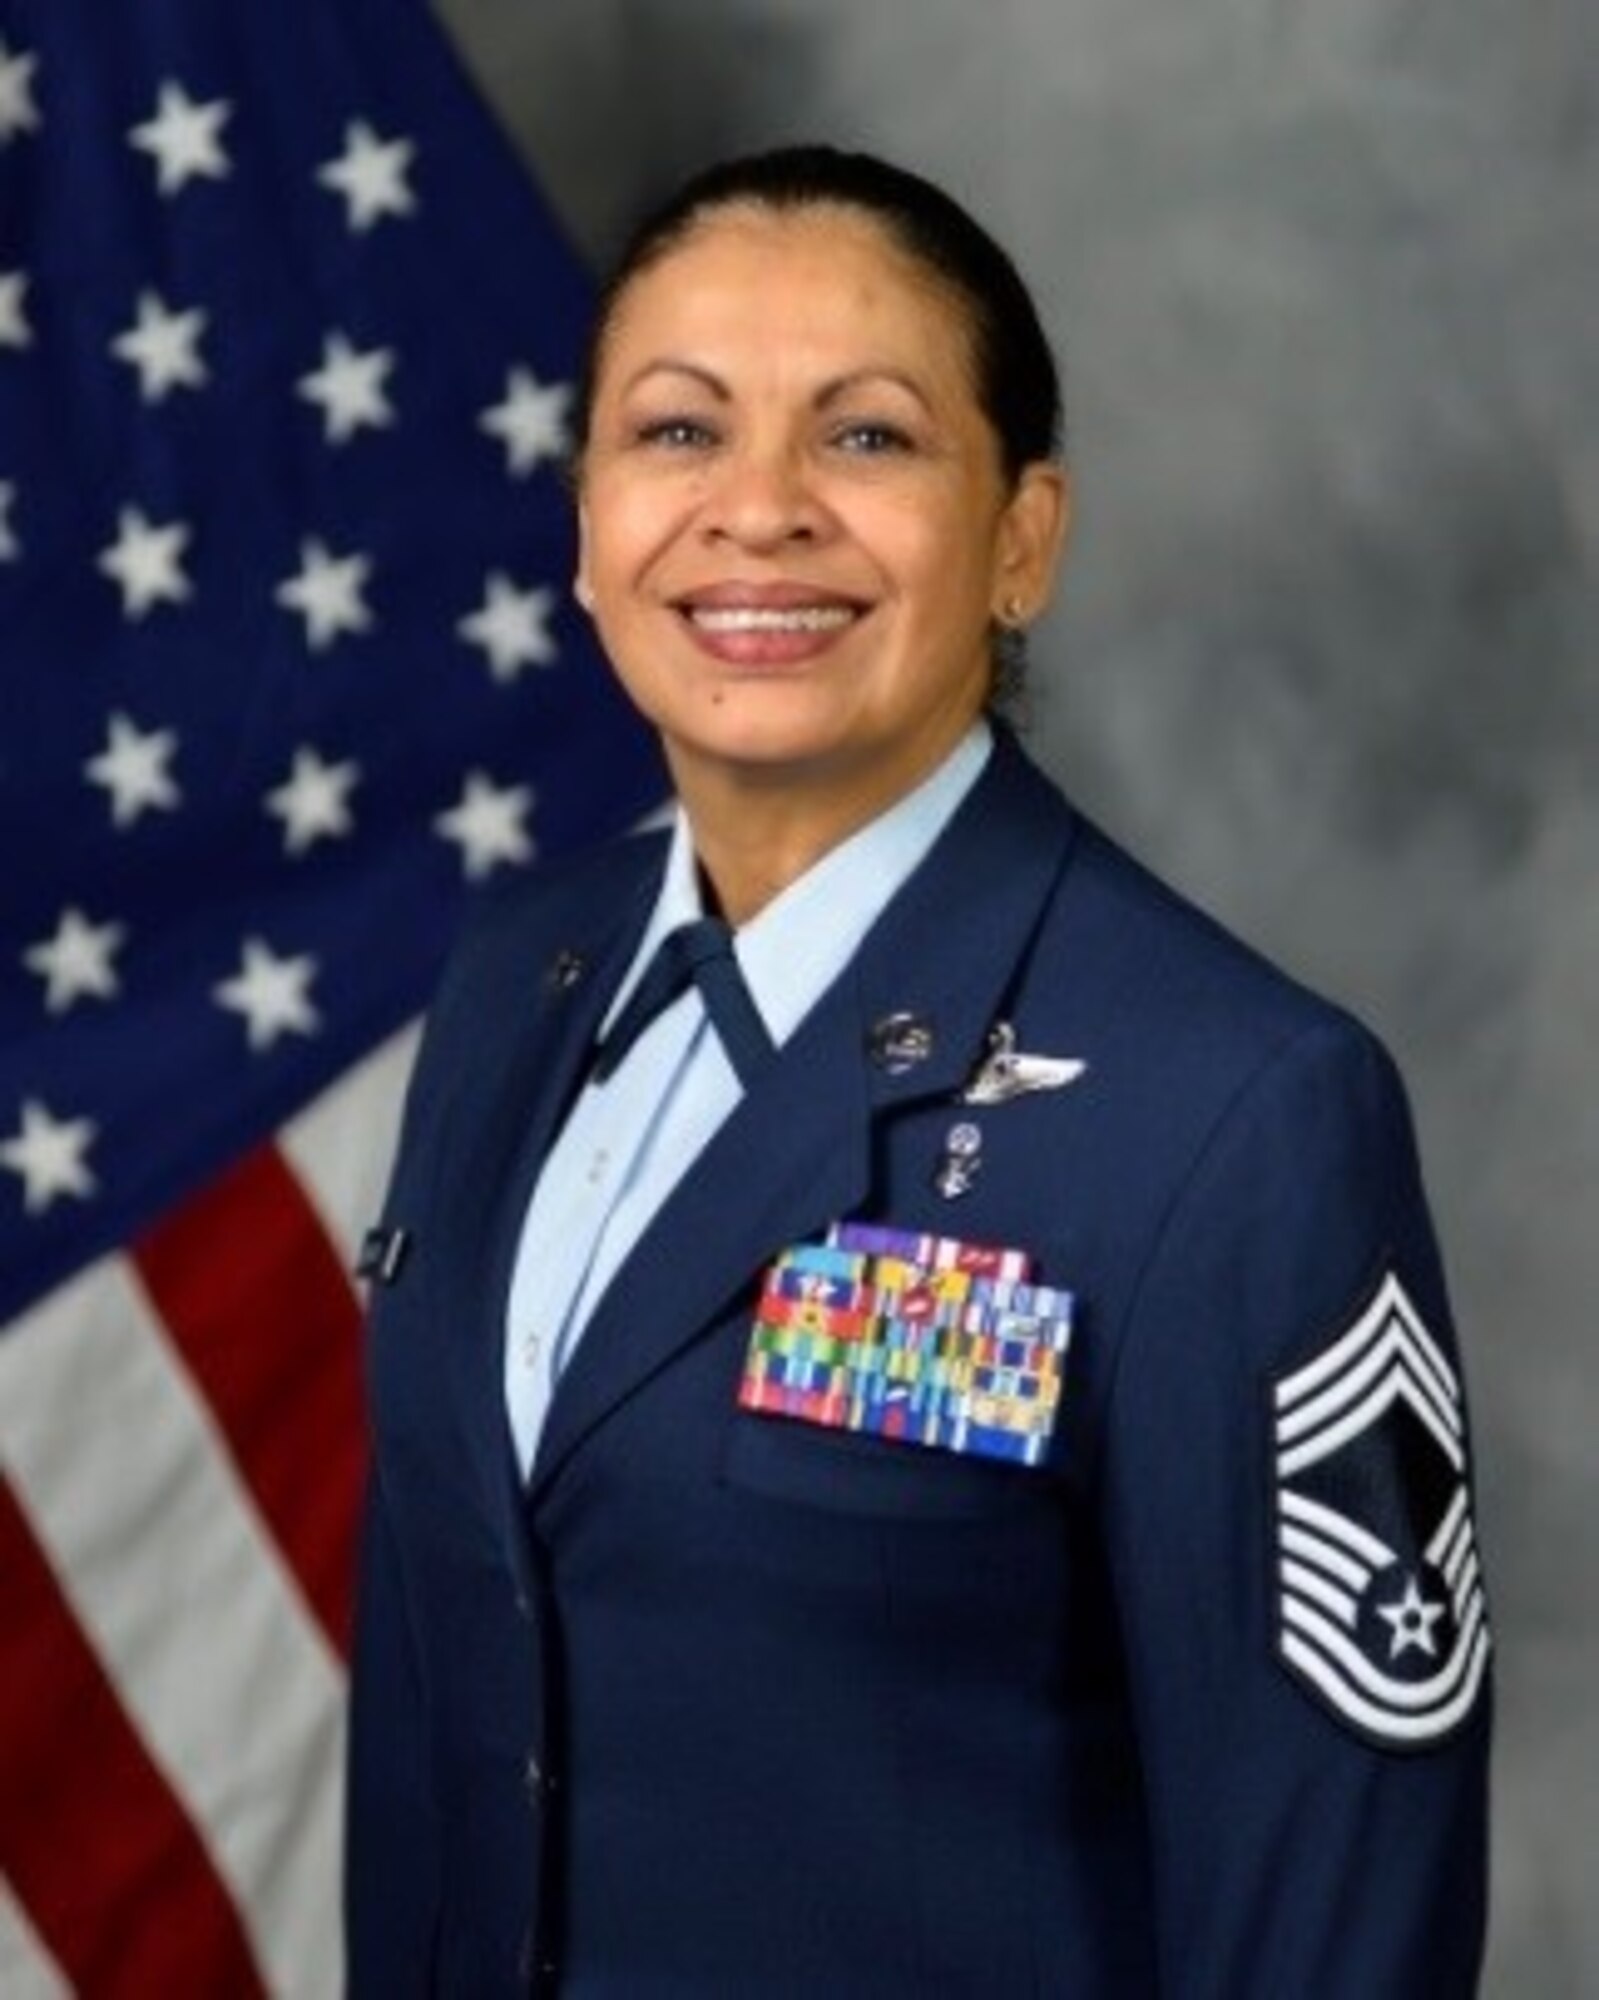 Chief Master Sgt. Josephine Keller is the Chief Enlisted Manager for the 403rd Aeromedical Staging Squadron, Keesler Air Force Base, Mississippi.